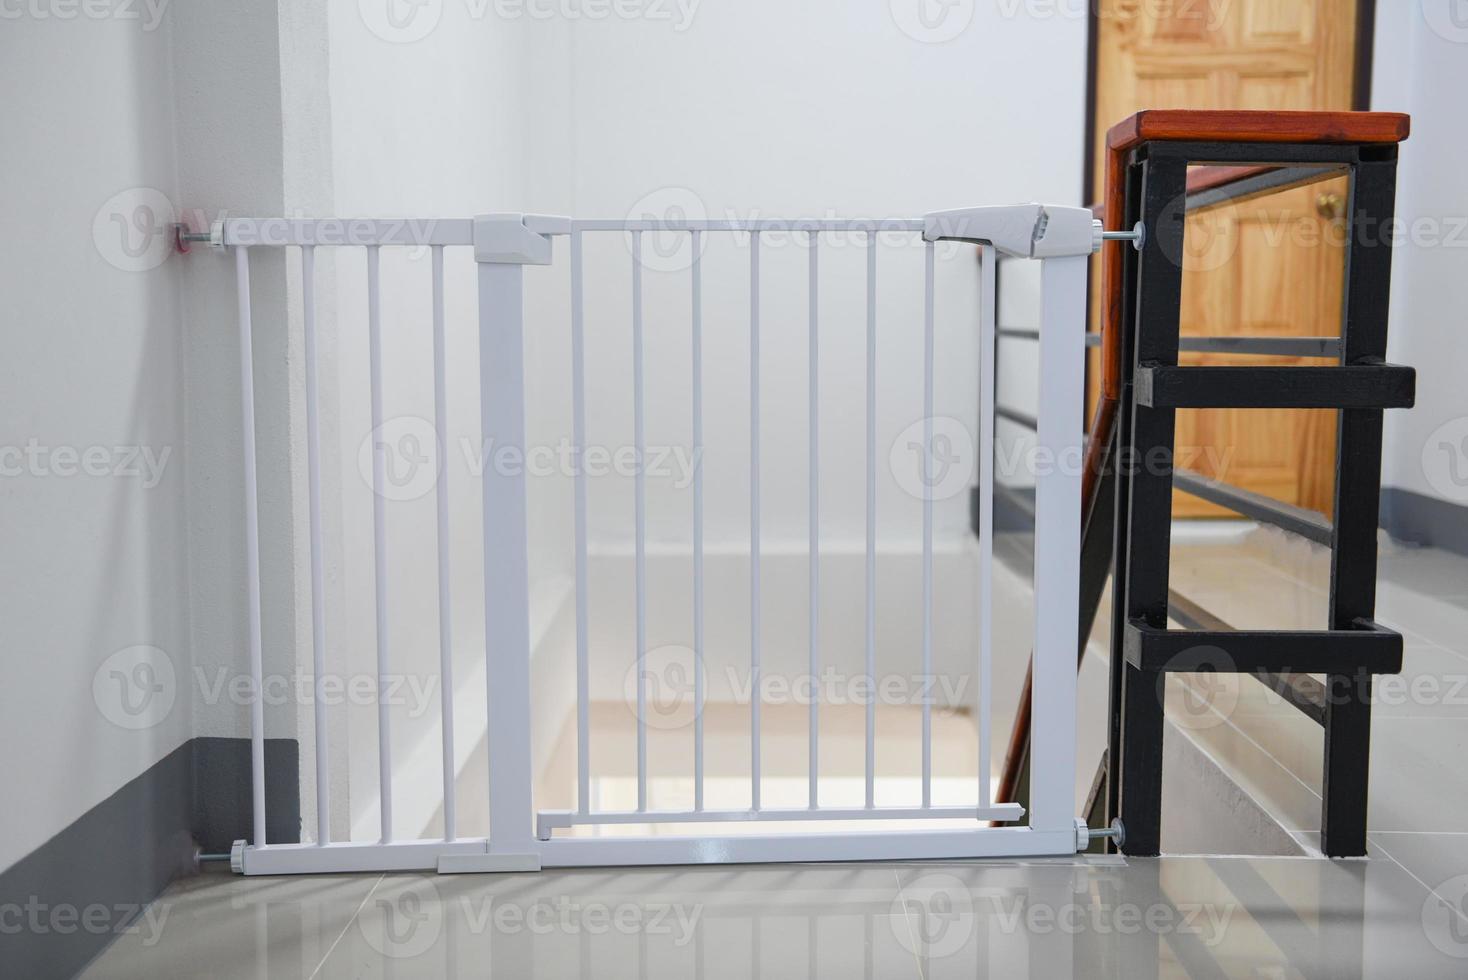 https://static.vecteezy.com/system/resources/previews/004/631/659/non_2x/baby-gate-safety-door-white-fence-for-safety-children-on-stairs-or-dog-gate-photo.JPG